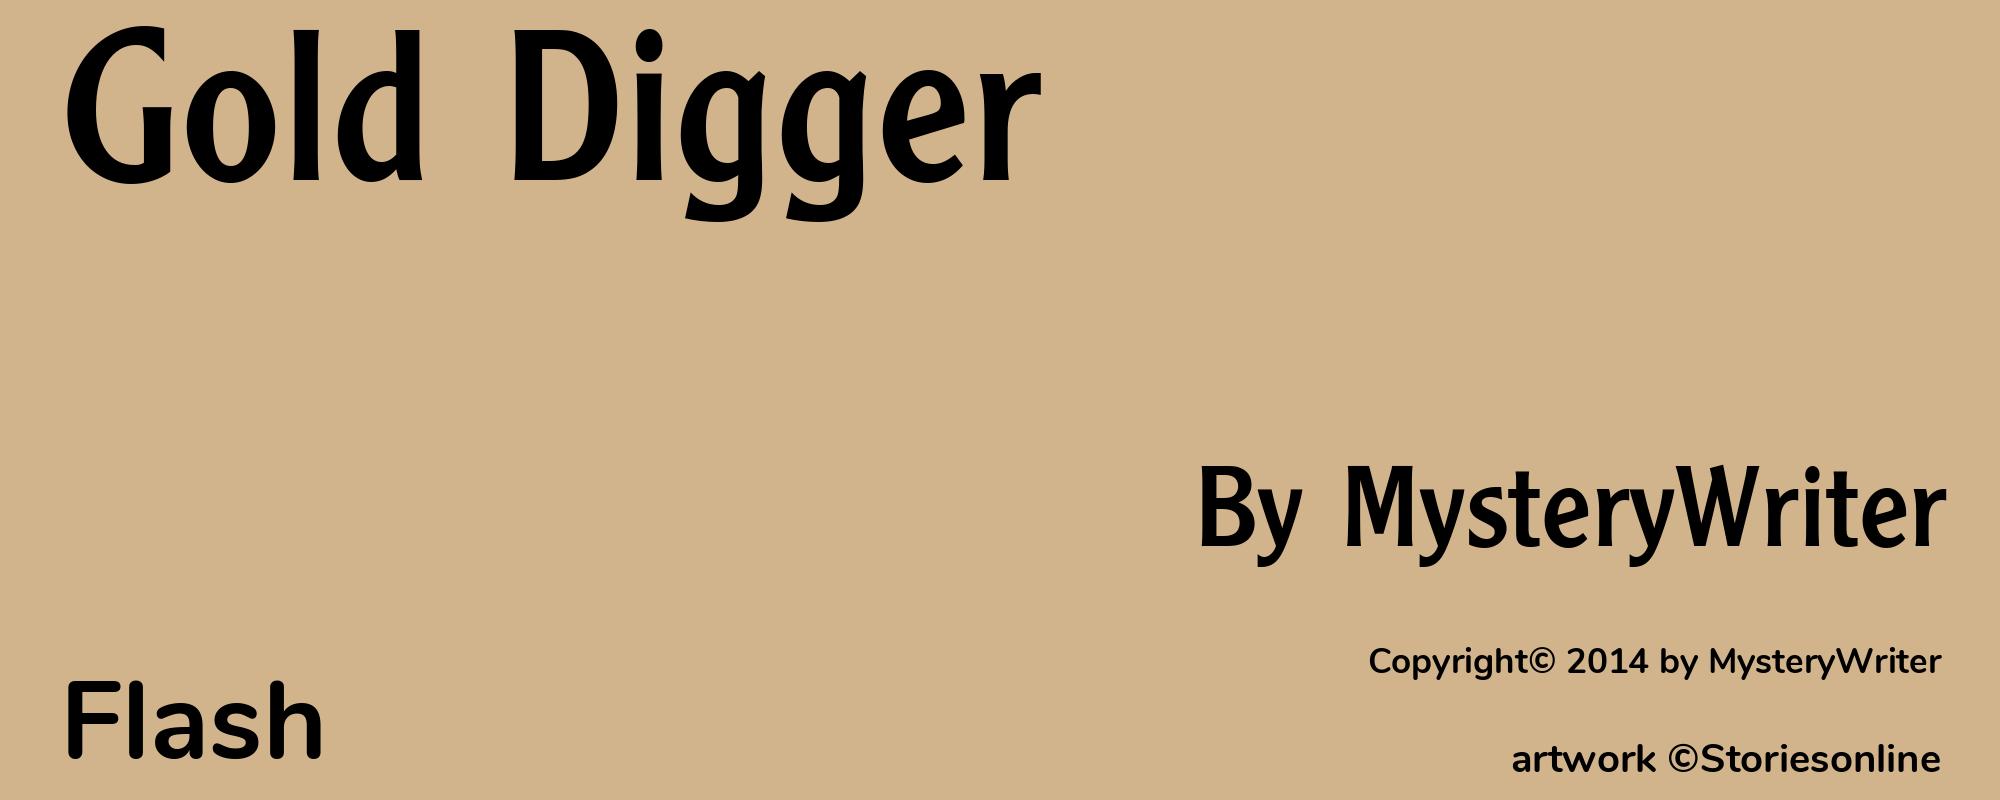 Gold Digger - Cover